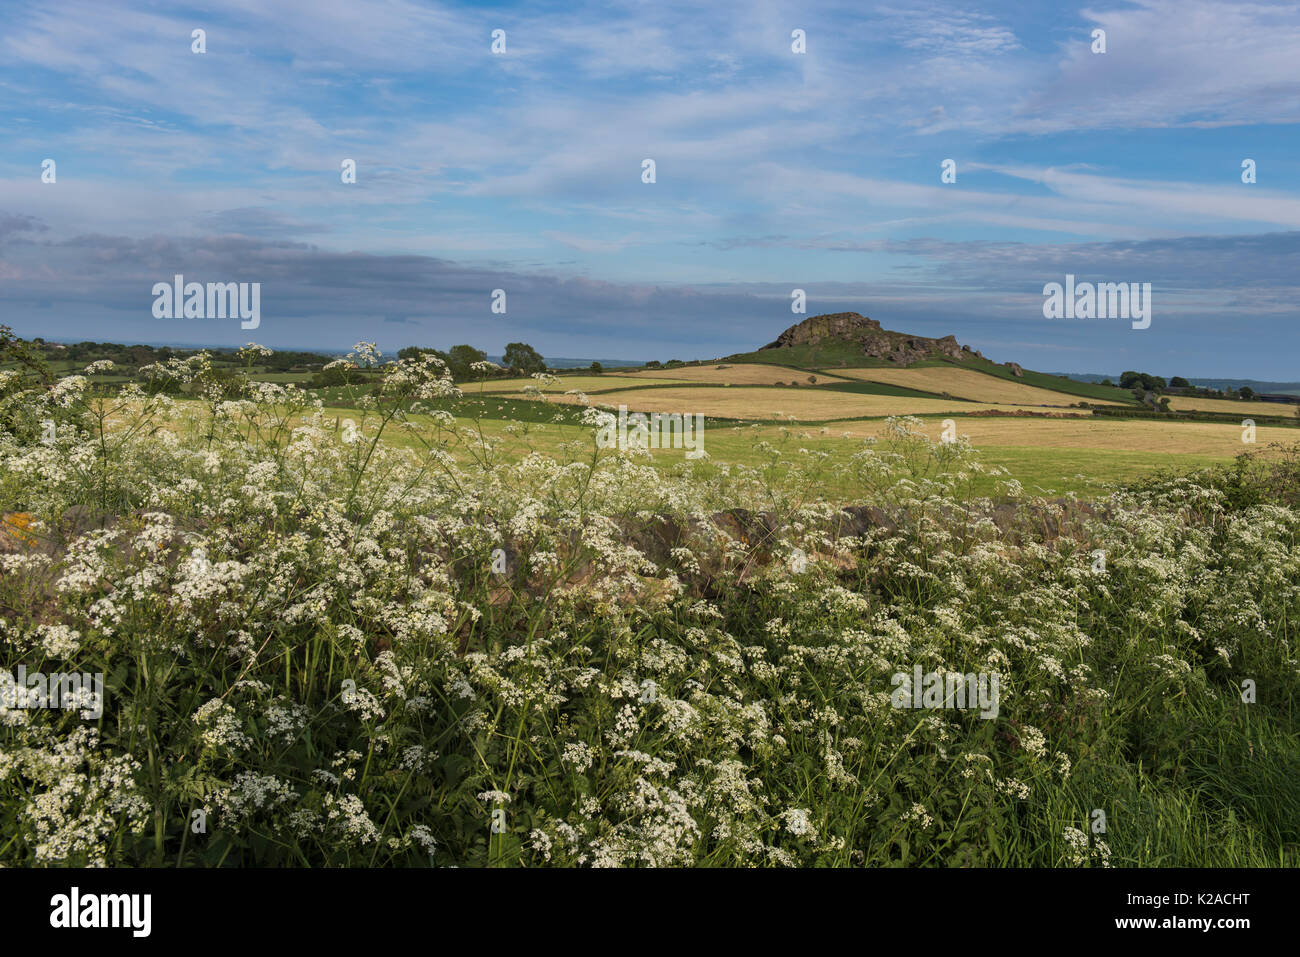 View of distinctive rocky outcrop of Almscliffe Crag under blue sky & across multi-coloured fields & Cow Parsley - North Yorkshire, England, UK. Stock Photo